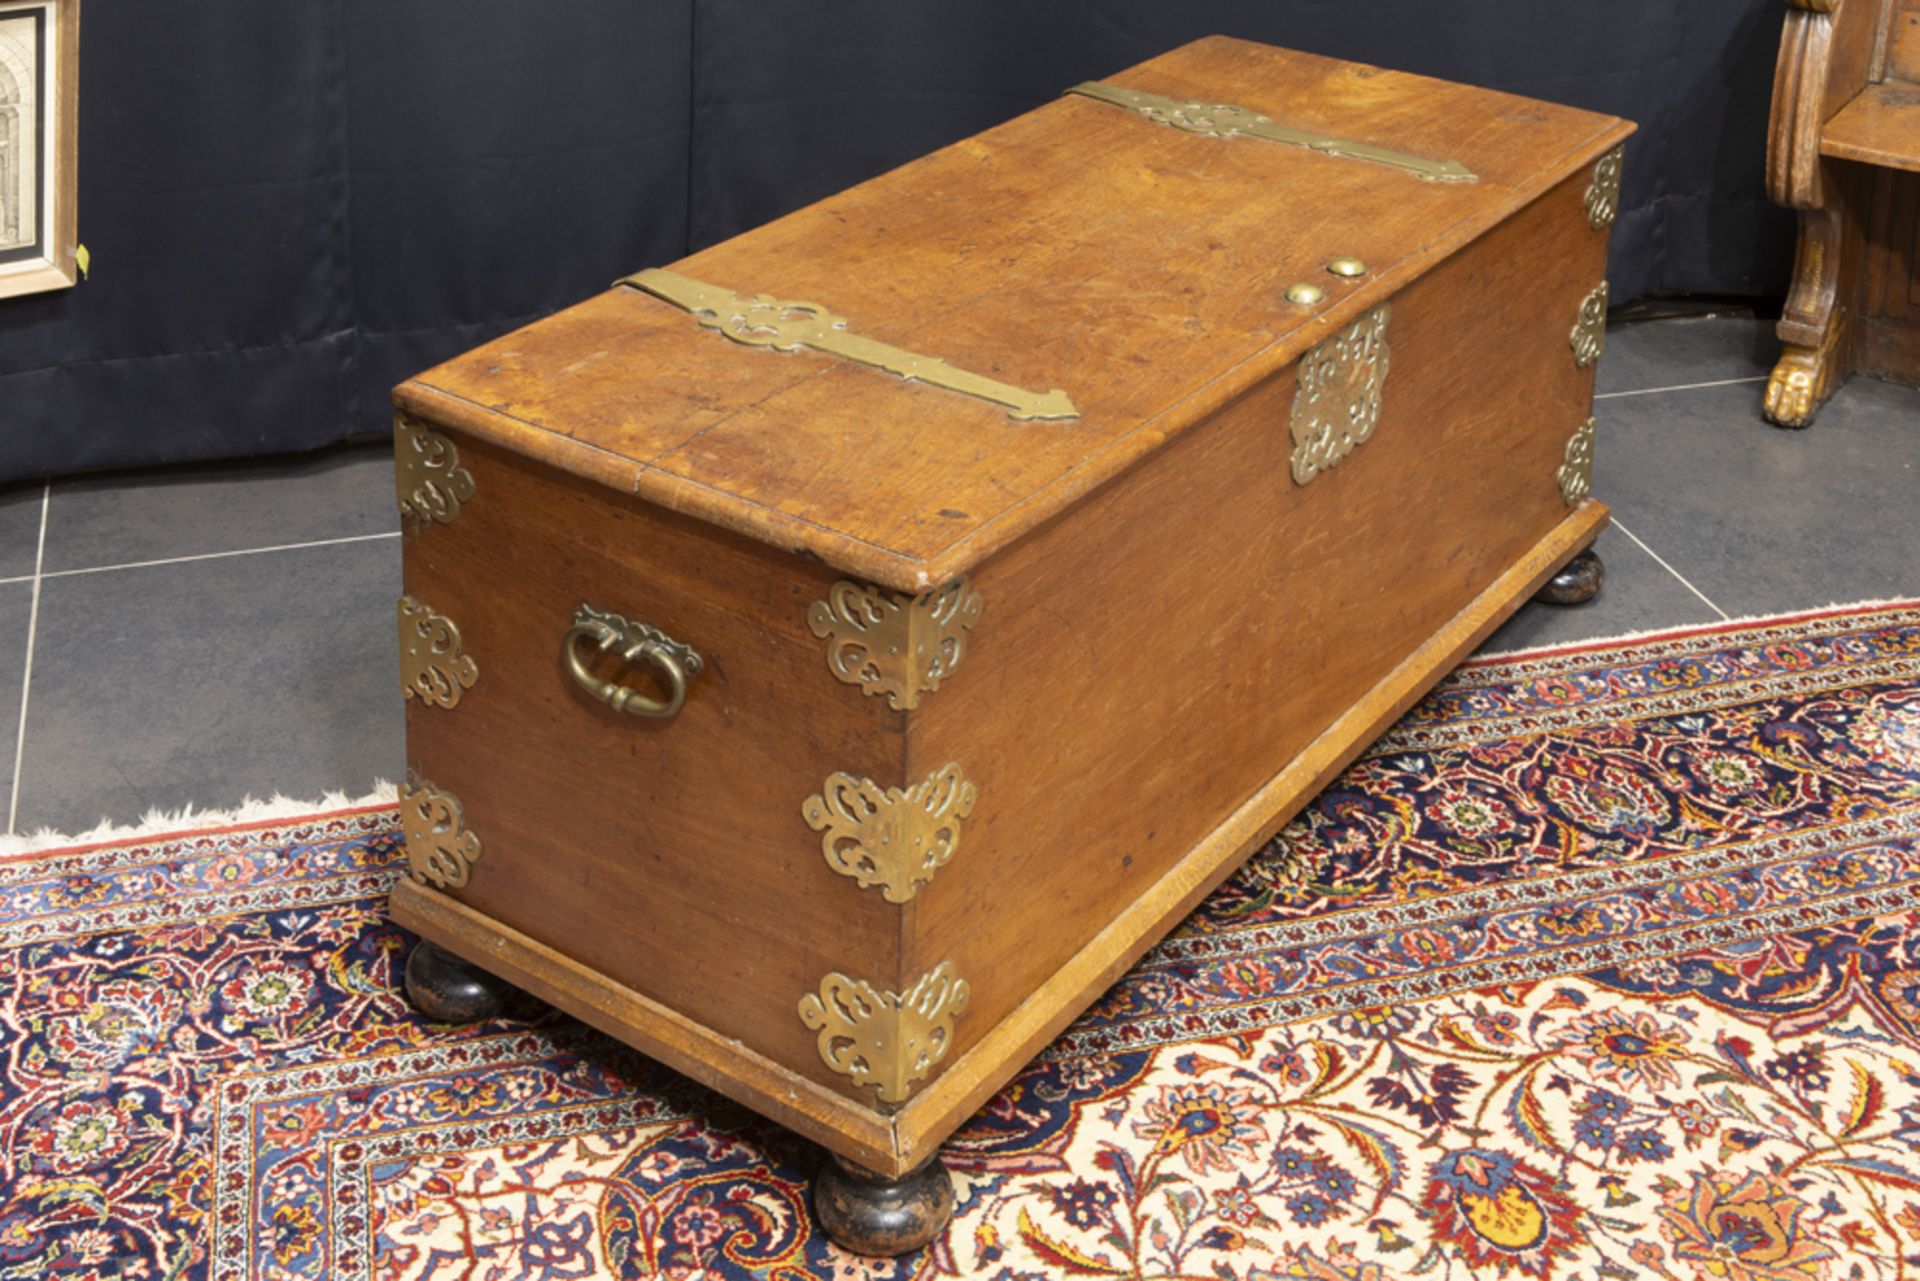 18th Cent. so-called "VOC" chest in an exotic type of wood with nice brass fittings || Achttiende - Image 4 of 4